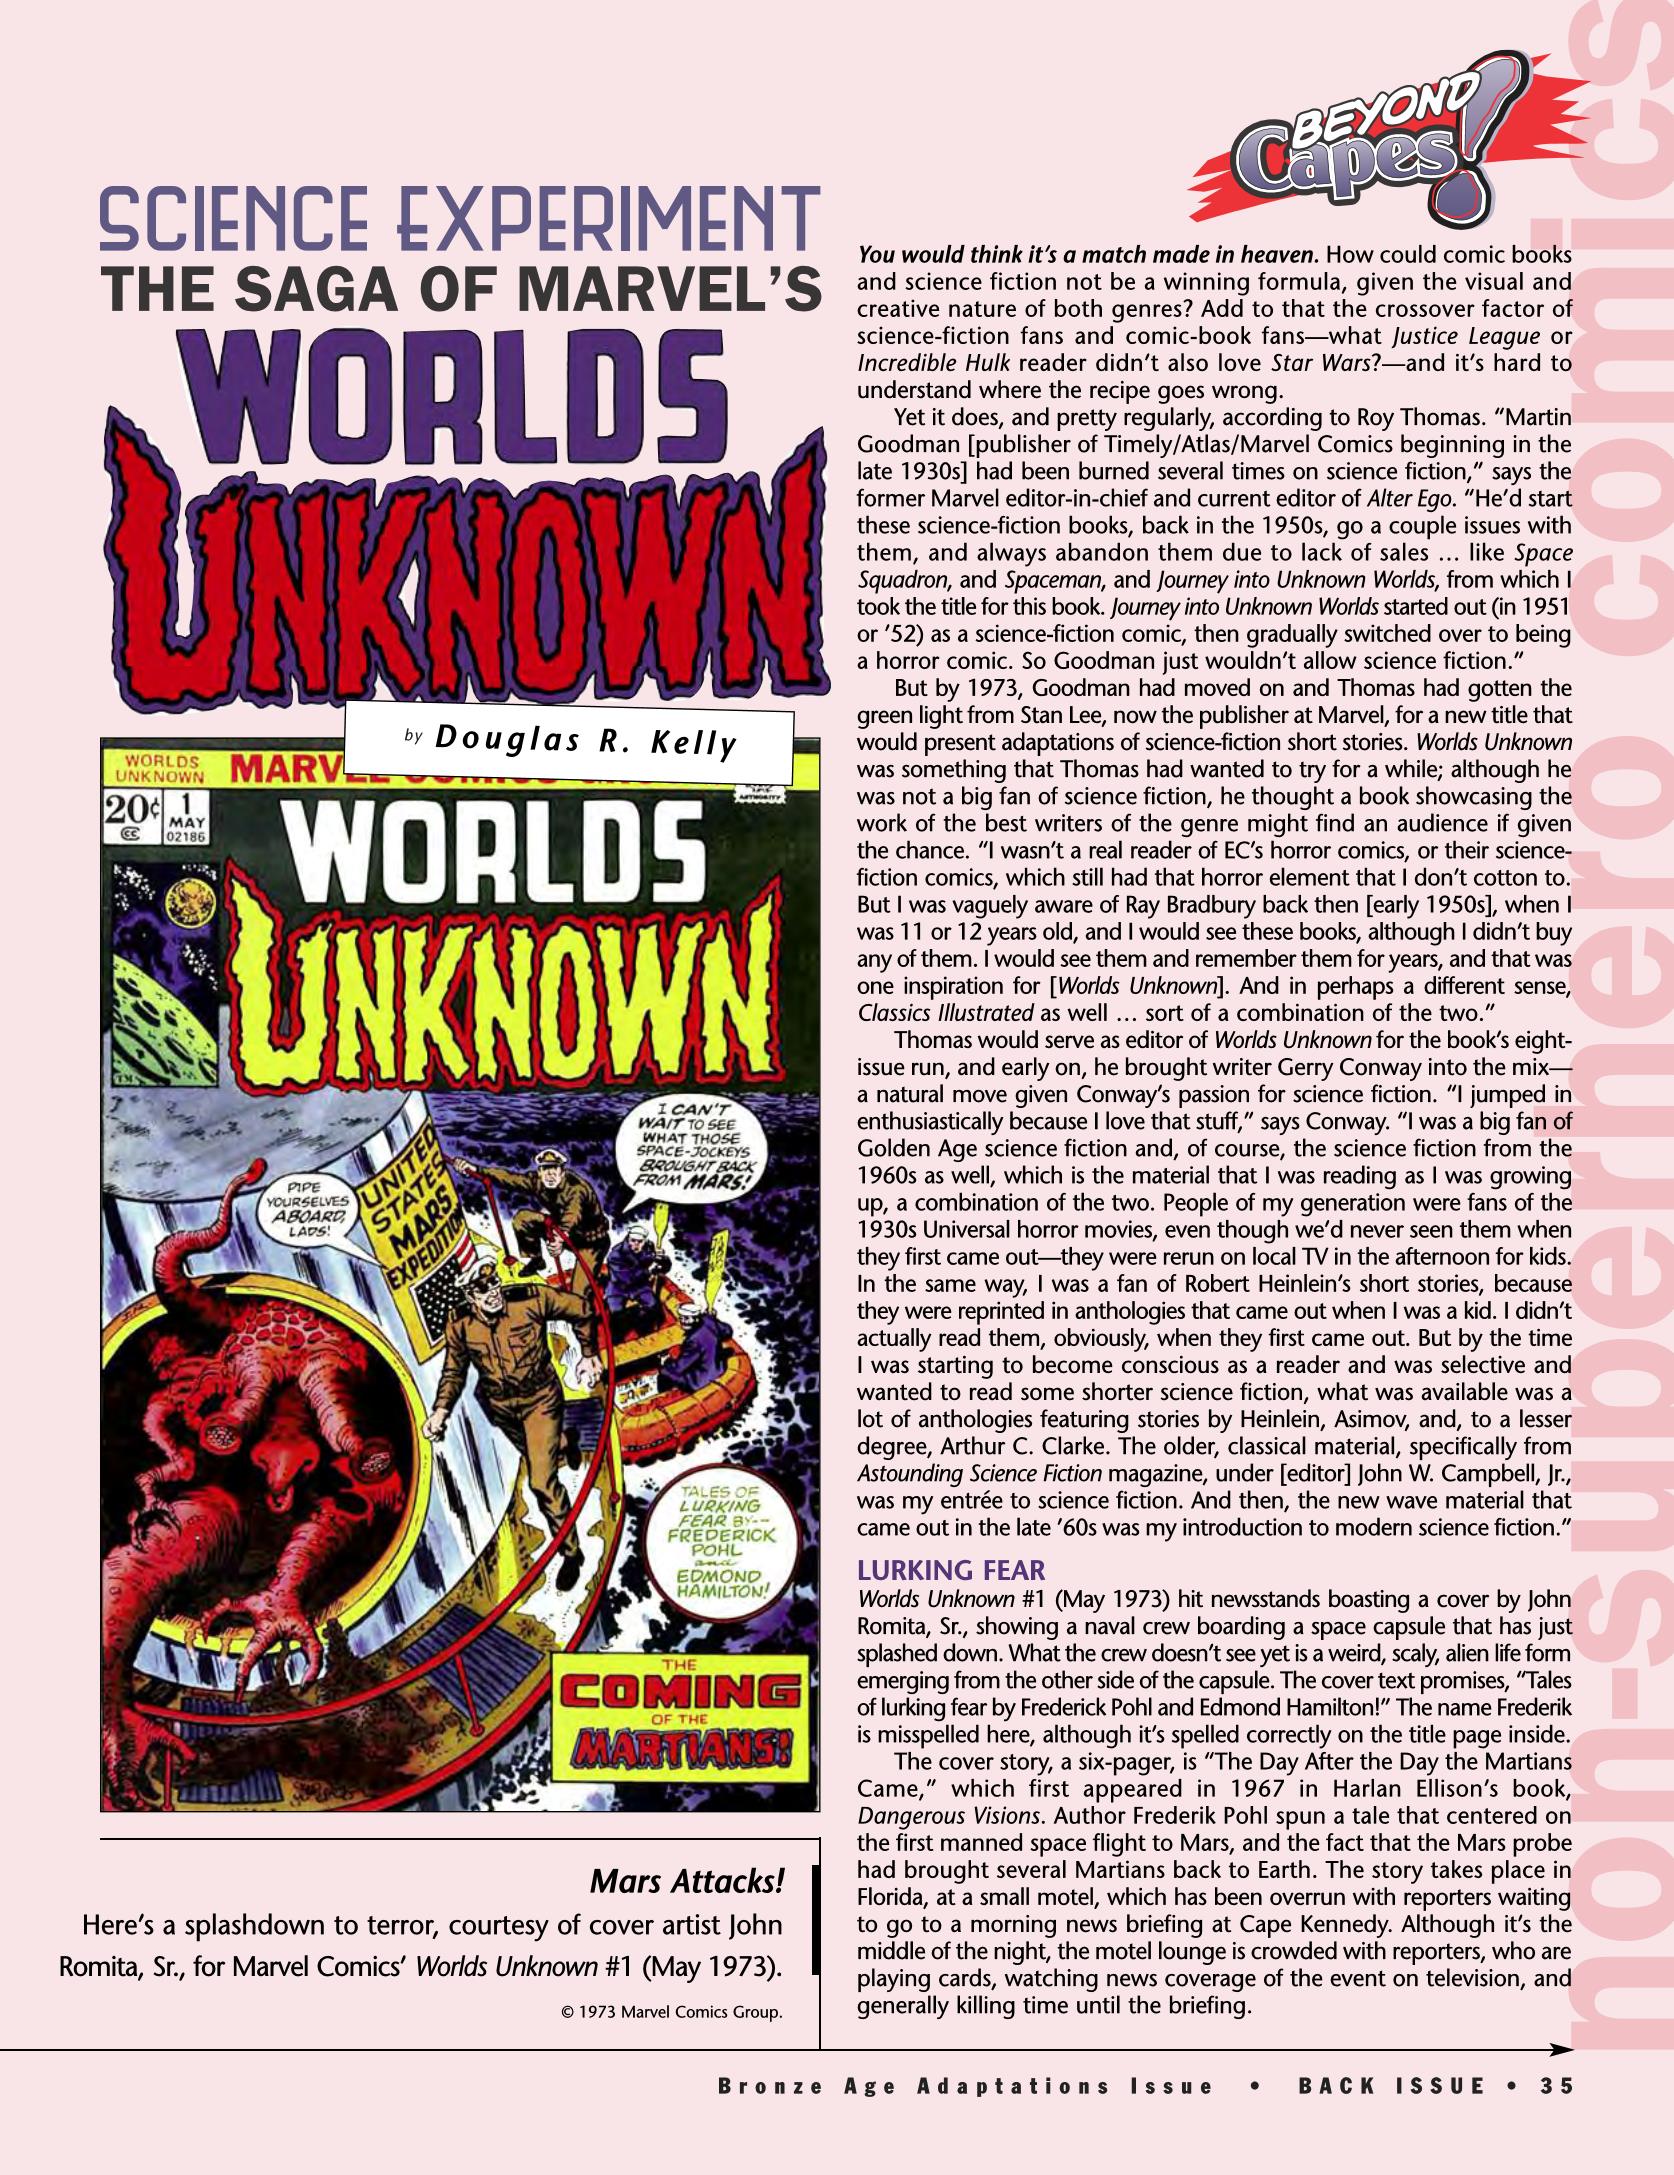 Read online Back Issue comic -  Issue #89 - 31